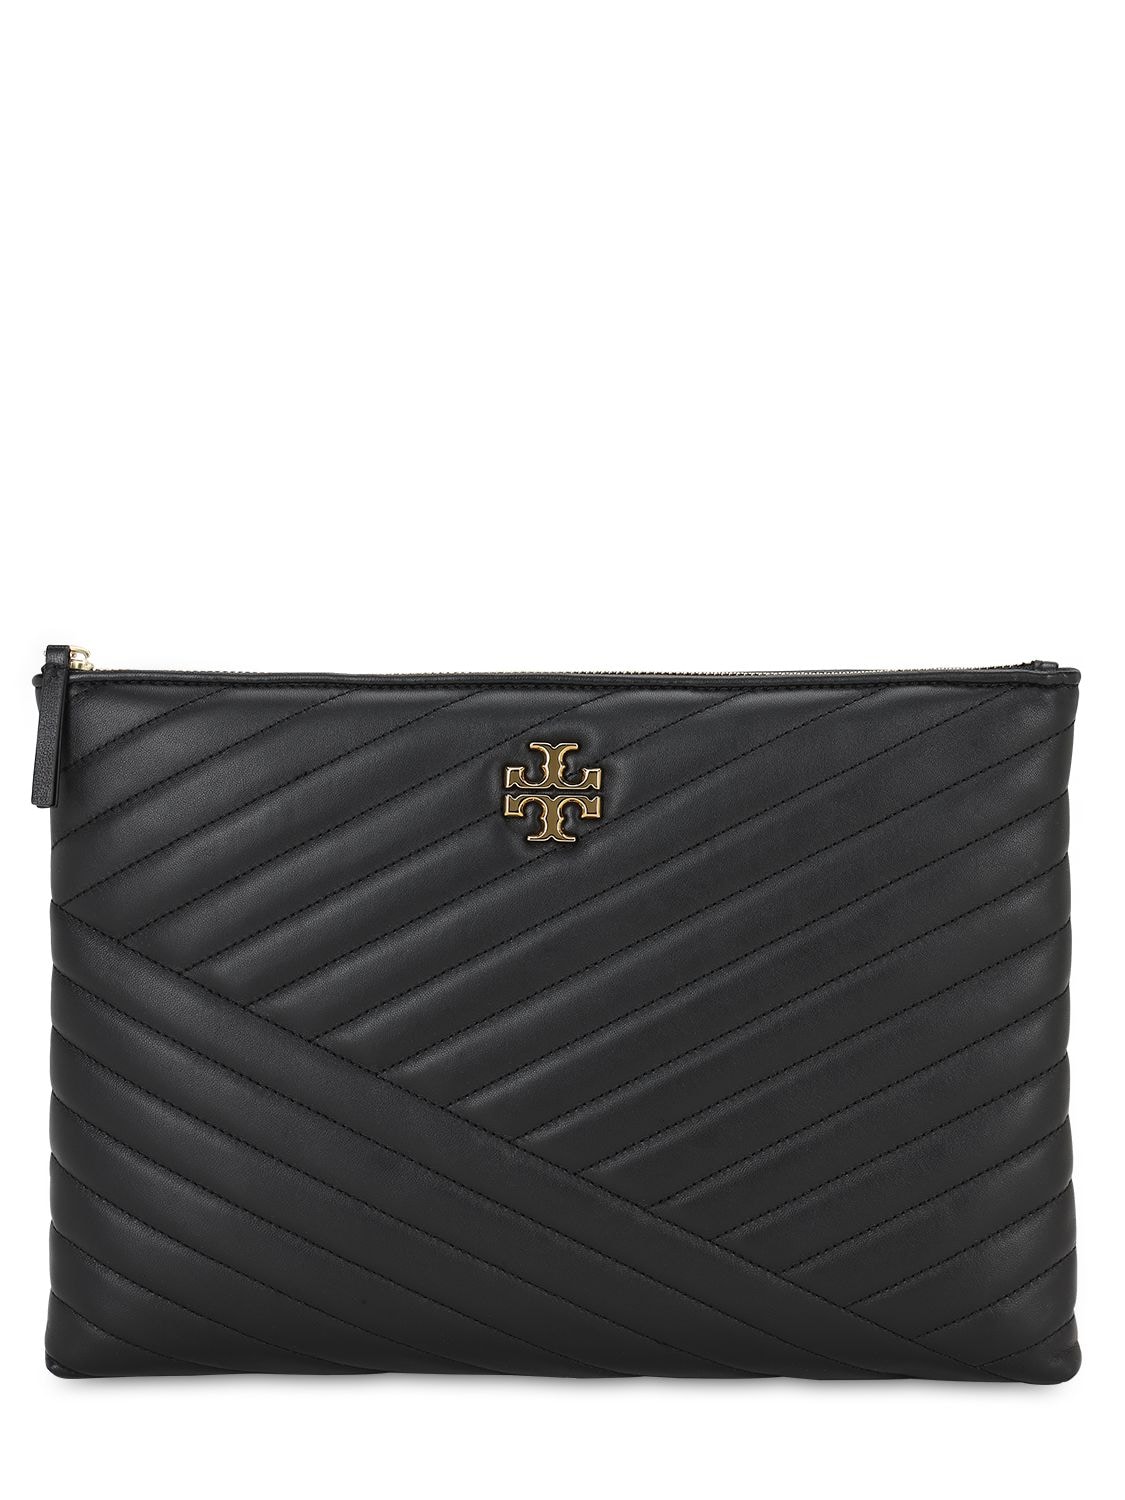 TORY BURCH QUILTED LEATHER POUCH,70IM3V006-MDAX0